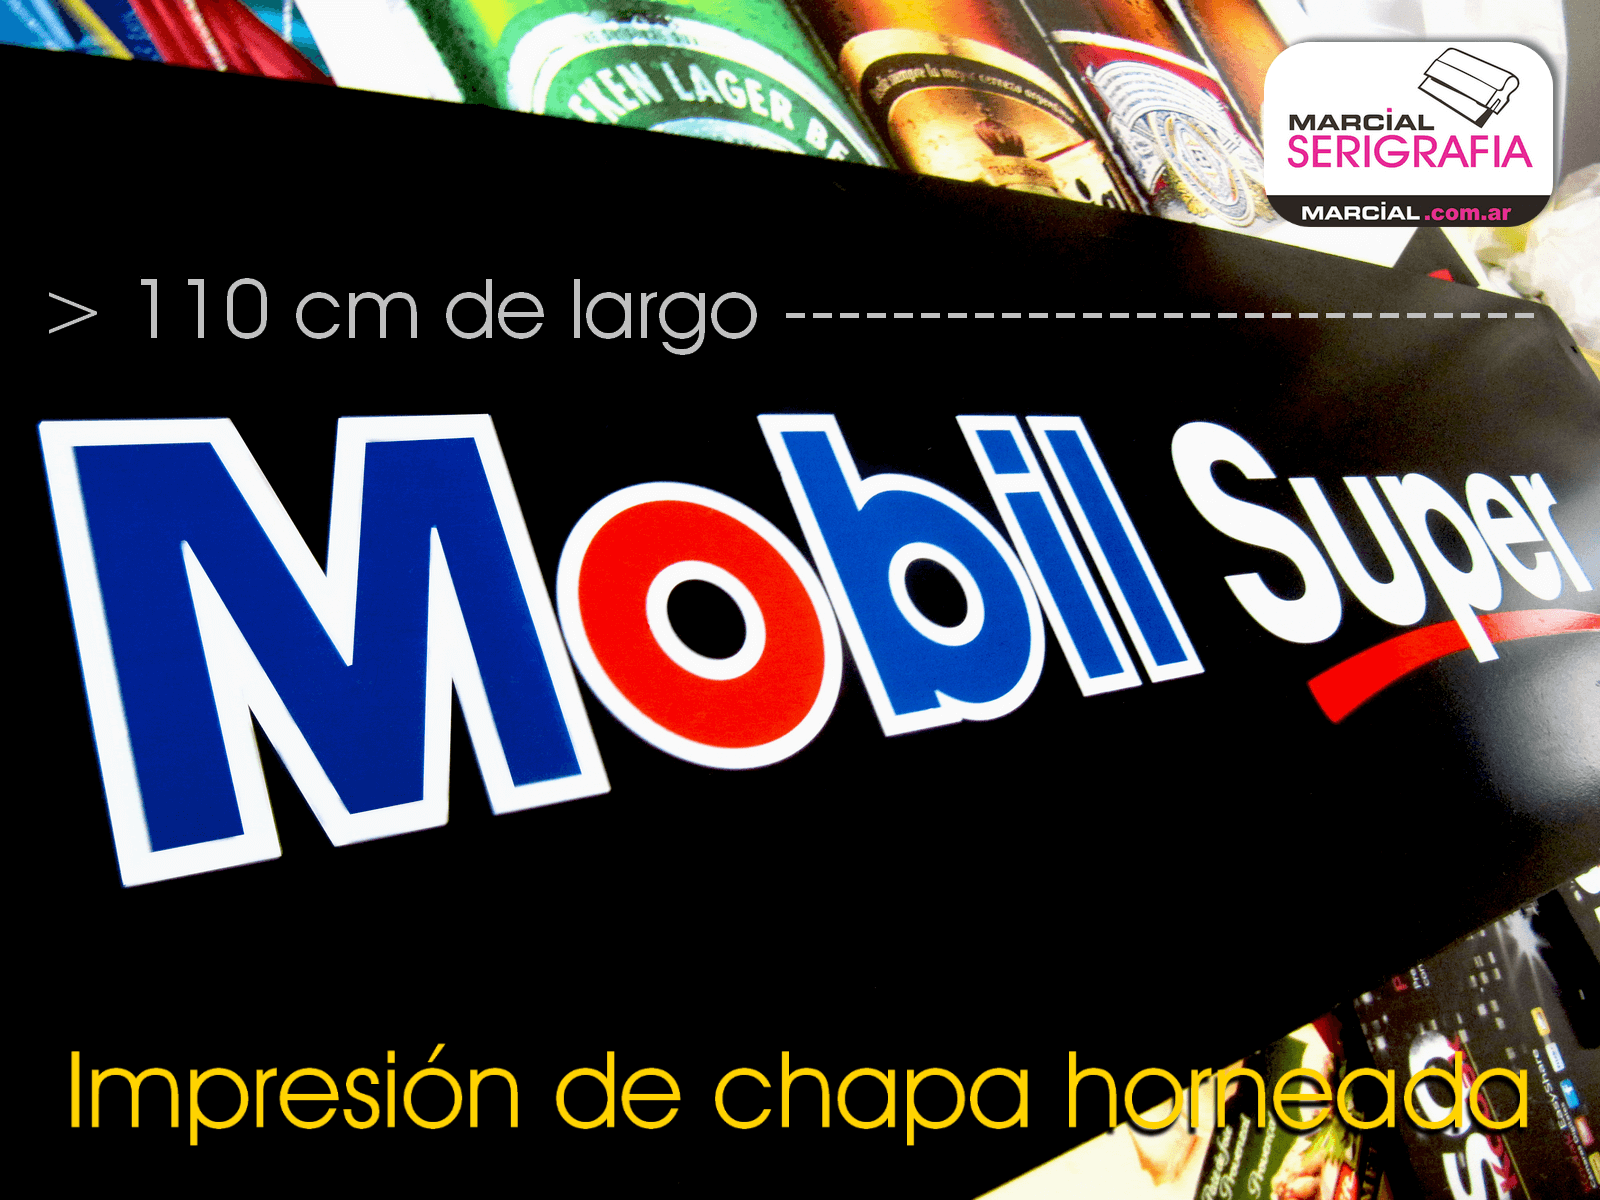 Screen printing on enameled plate for the "Mobil Super" Lubricants brand, printed in 2 colors + sectorized white base that served as "support" for the red and blue colors in order to keep the colors bright. This is what is done when working with dark-based materials and you want the printed colors to respect a tone already preset by the factory.